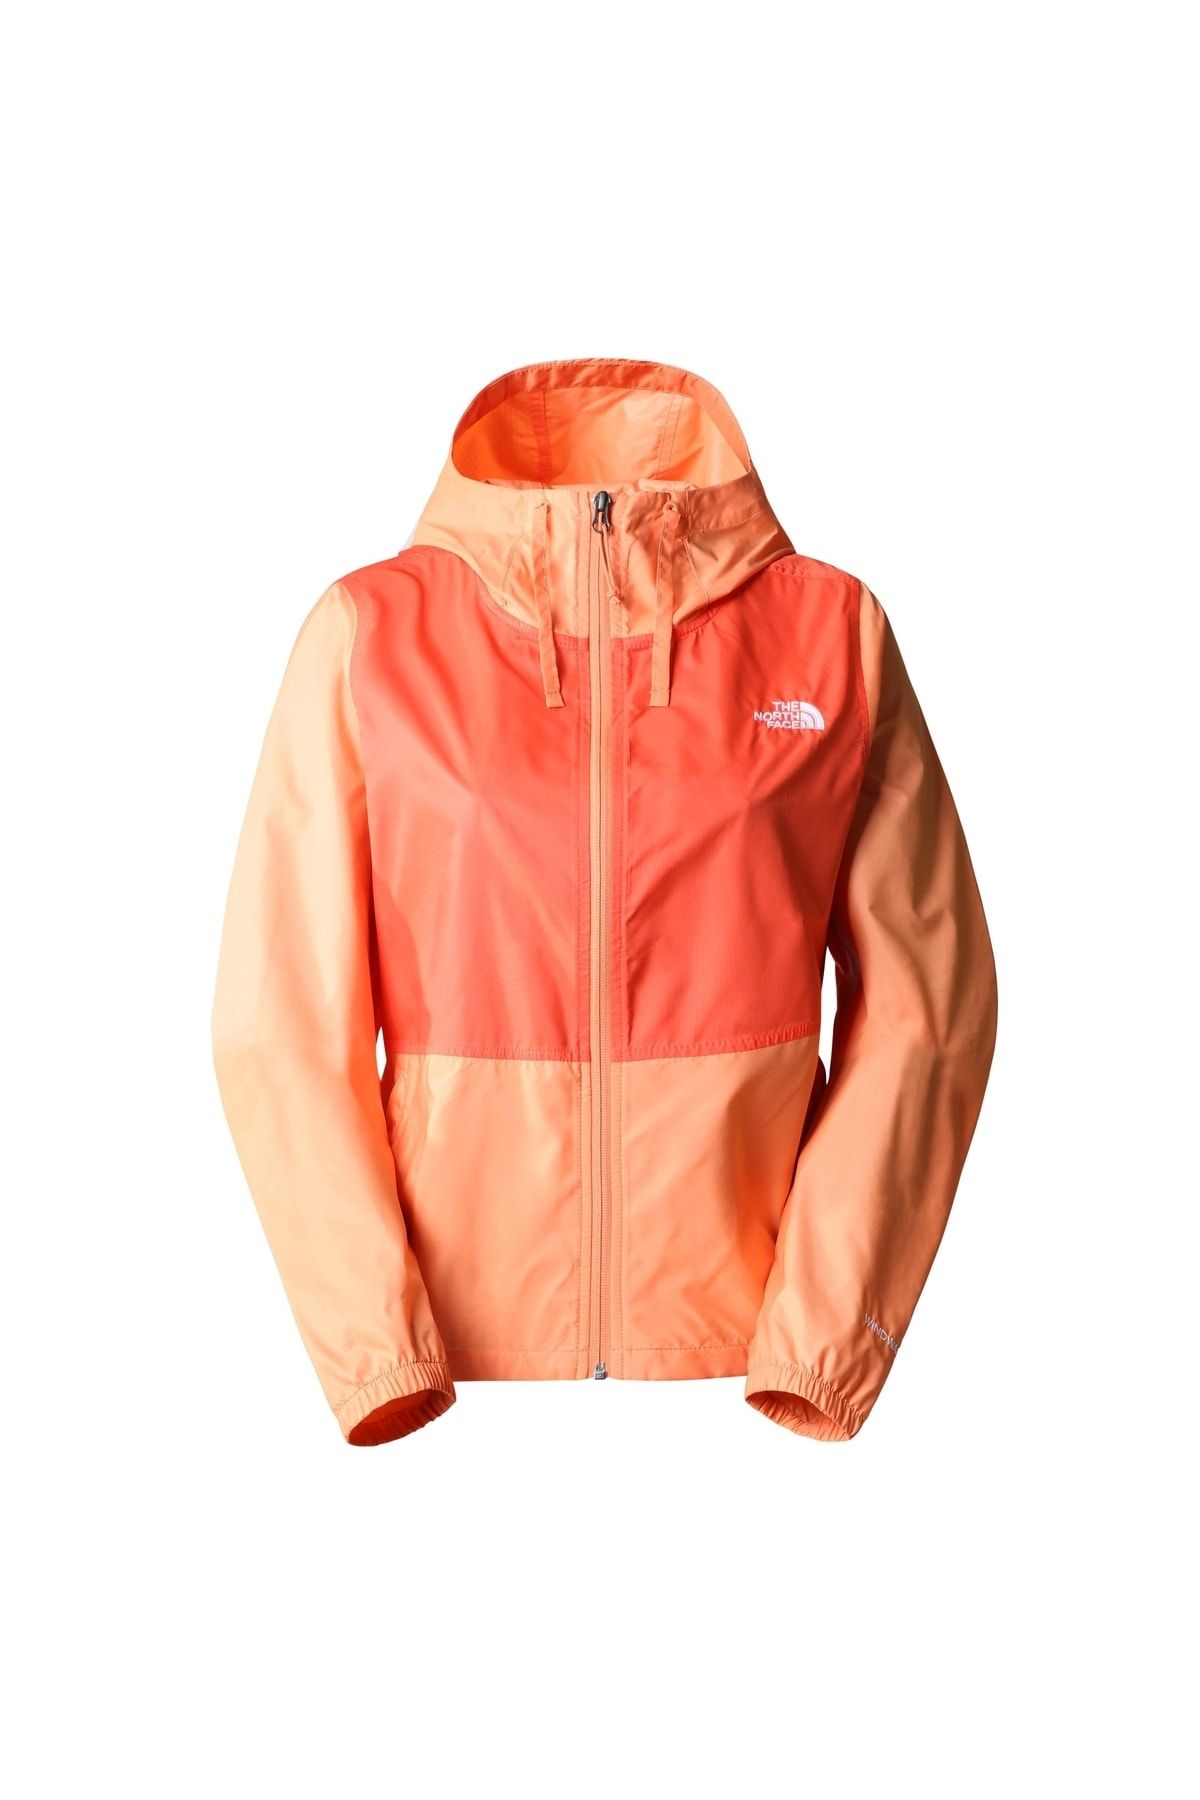 The North Face W Cyclone Jacket 3 Nf0a82r7pk61